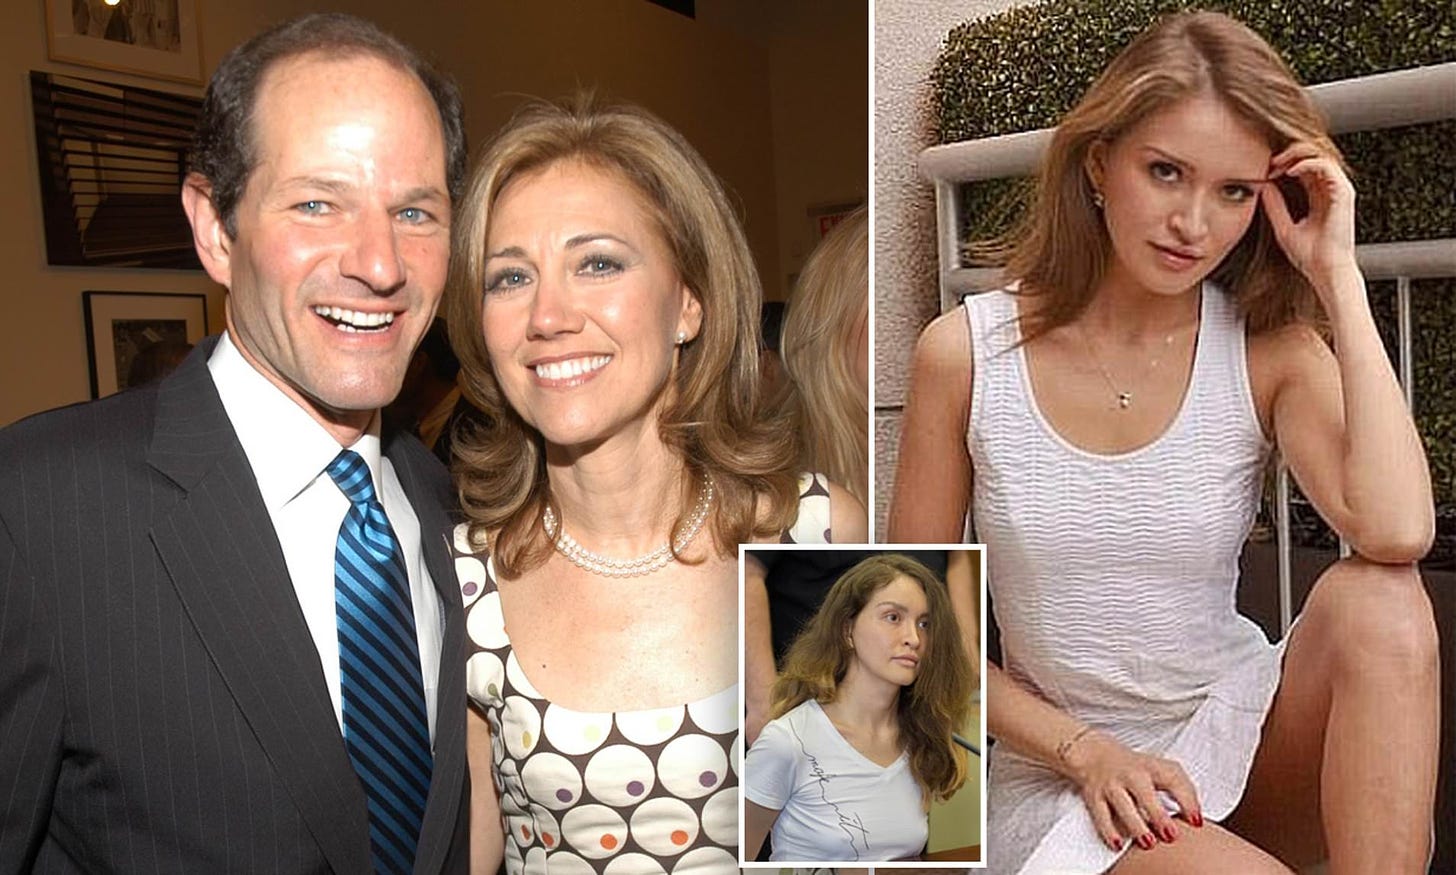 Former NY governor Spitzer used an alias at the hospital when he checked in  on the Russian escort | Daily Mail Online